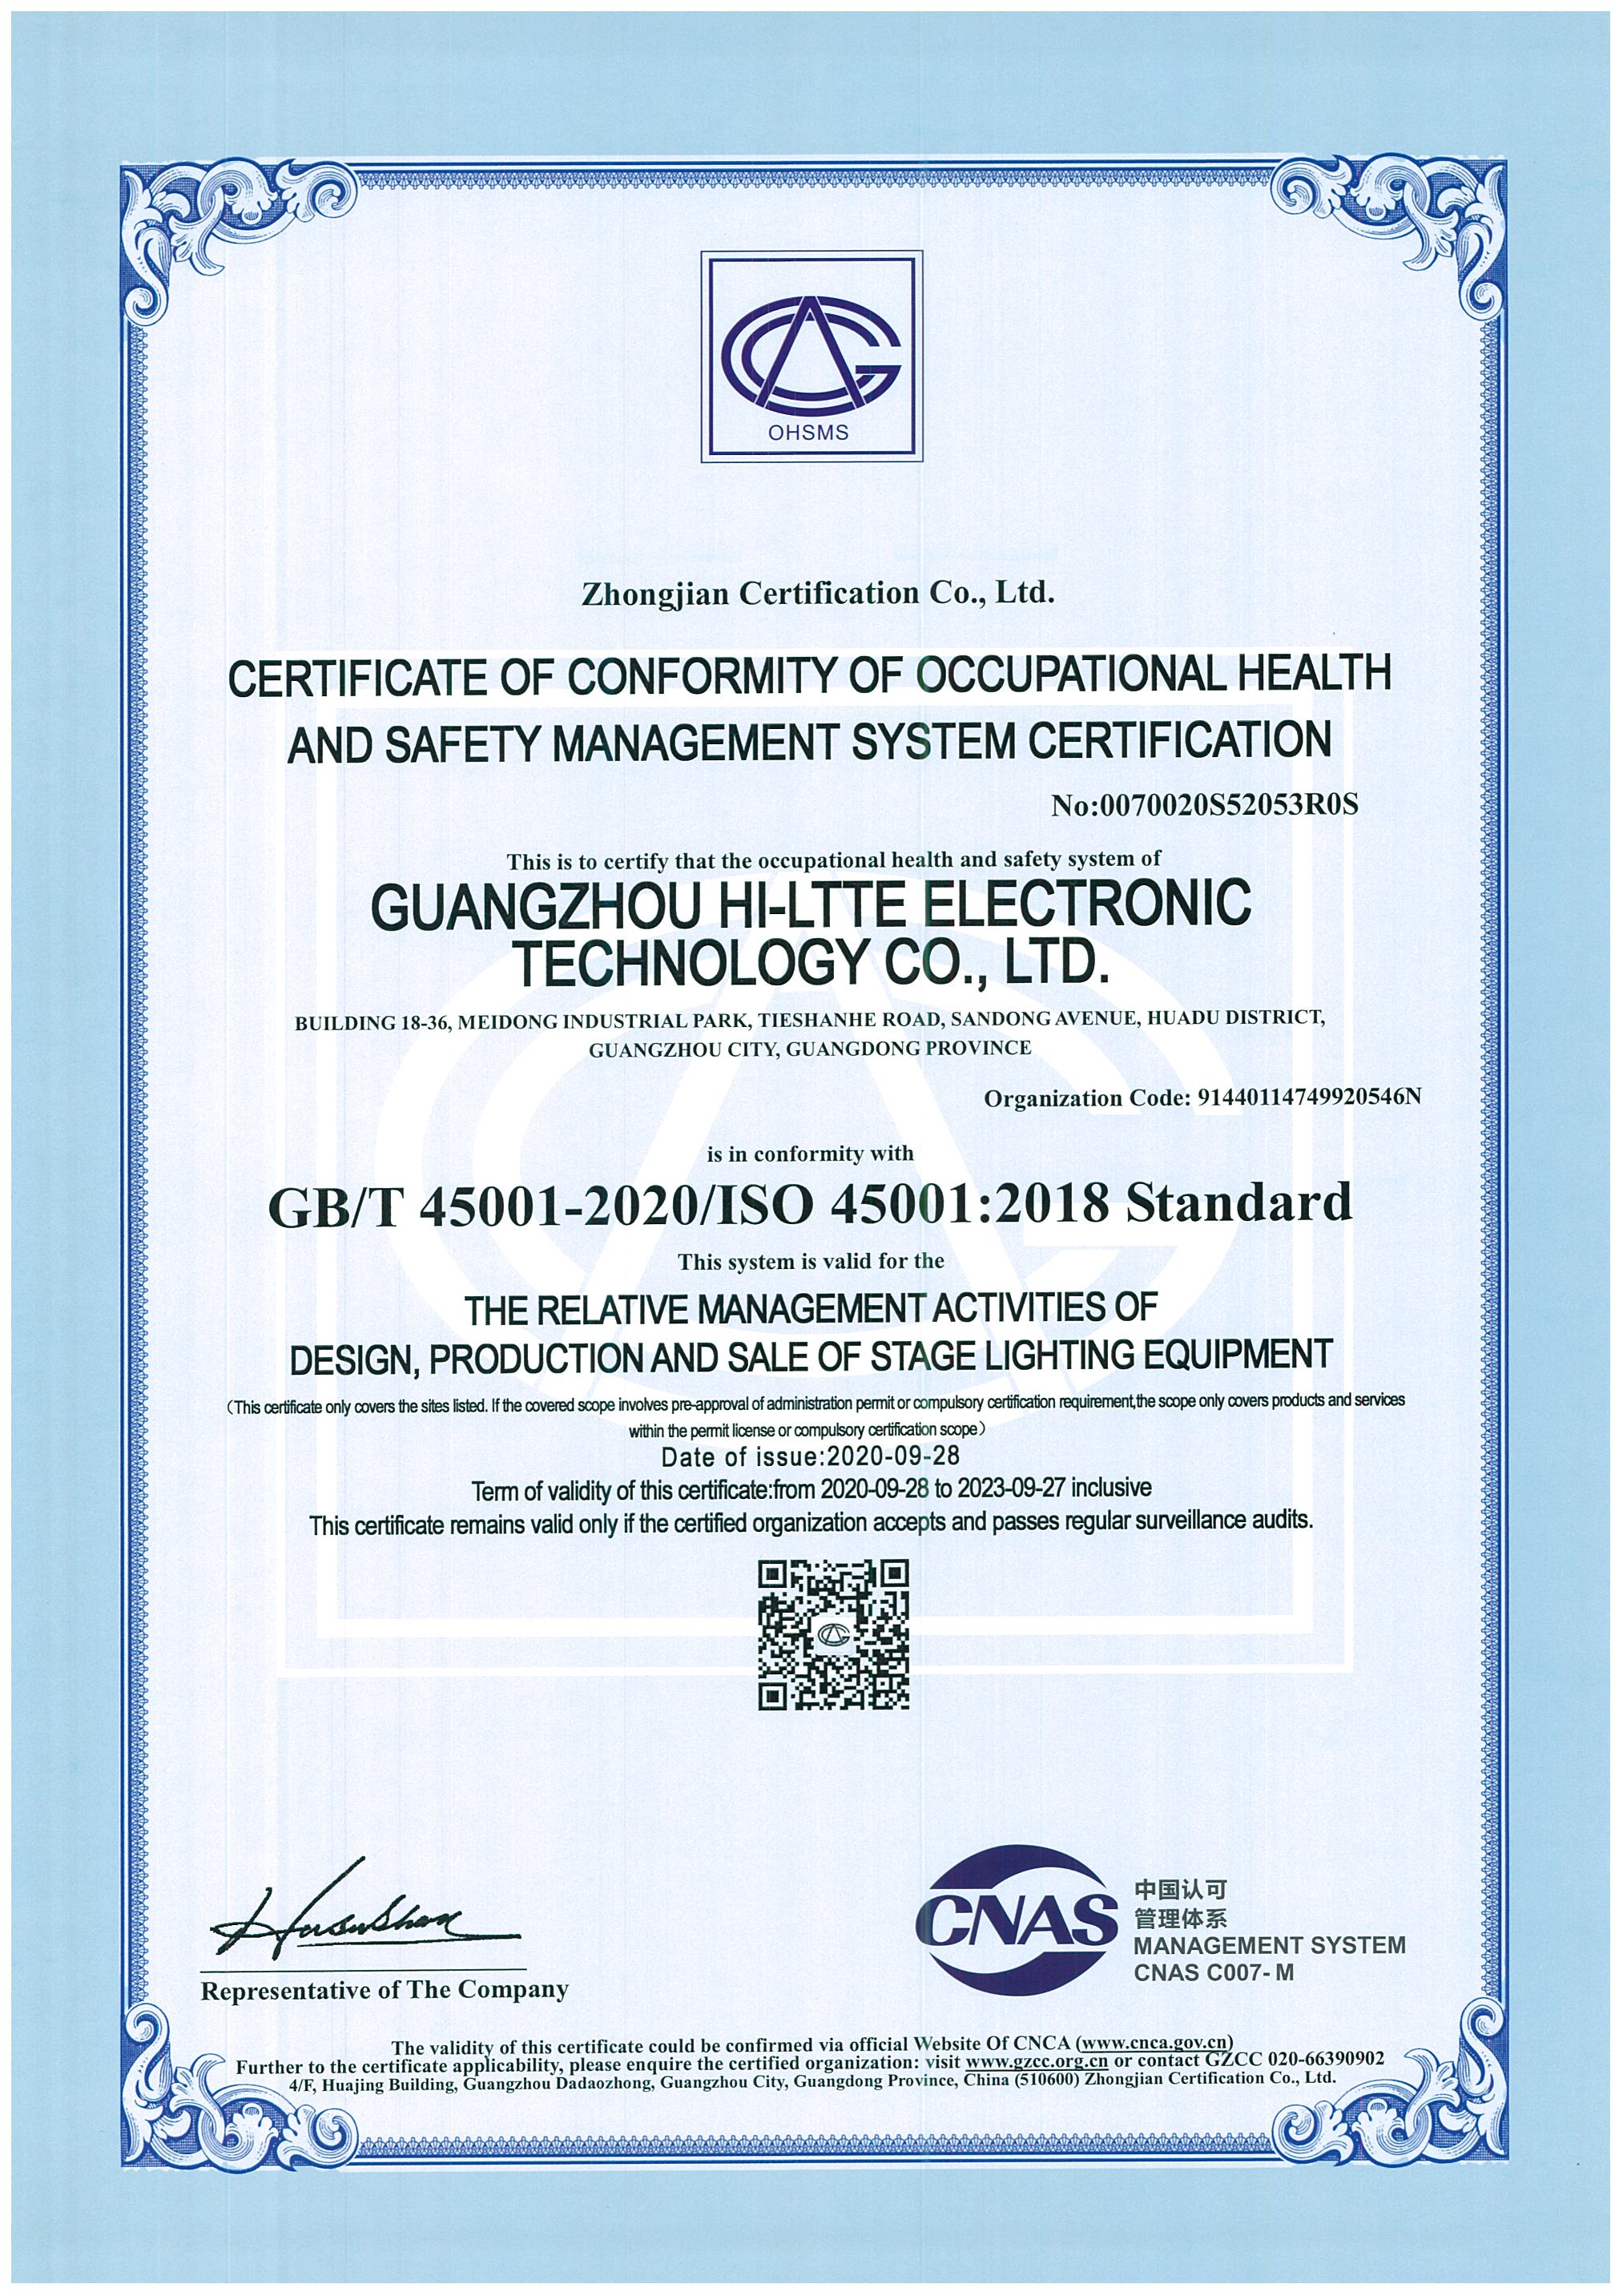 CERTIFICATE OF CONFORMITY OF OCCUPATIONAL HEALTH AND SAFETY MANAGEMENT SYSTEM CERTIFICATION